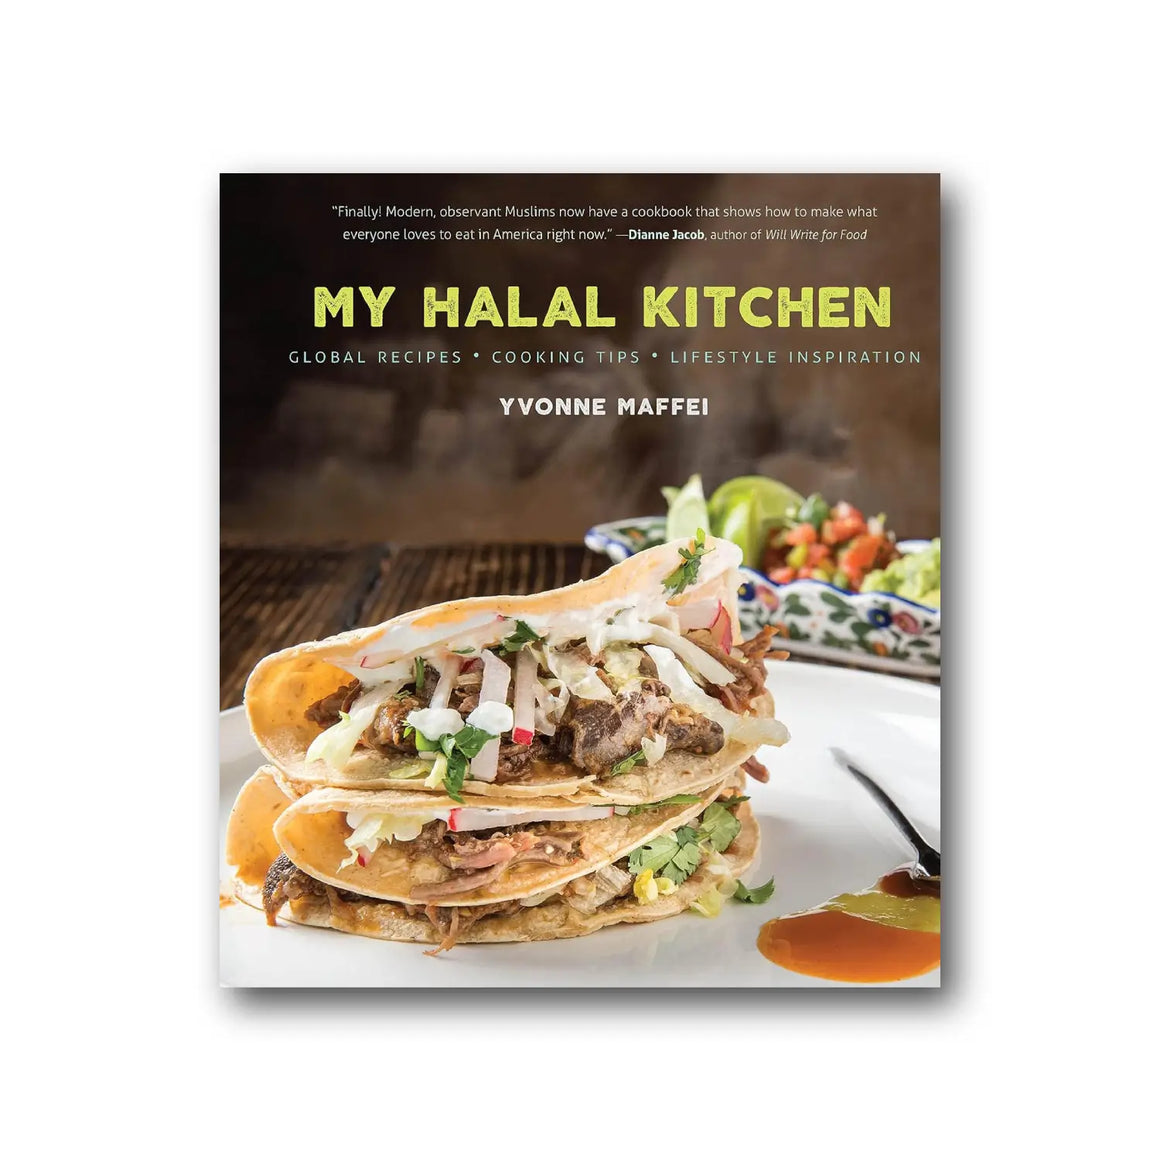 My Halal Kitchen: Global Recipes, Cooking Tips, & Lifestyle Inspiration